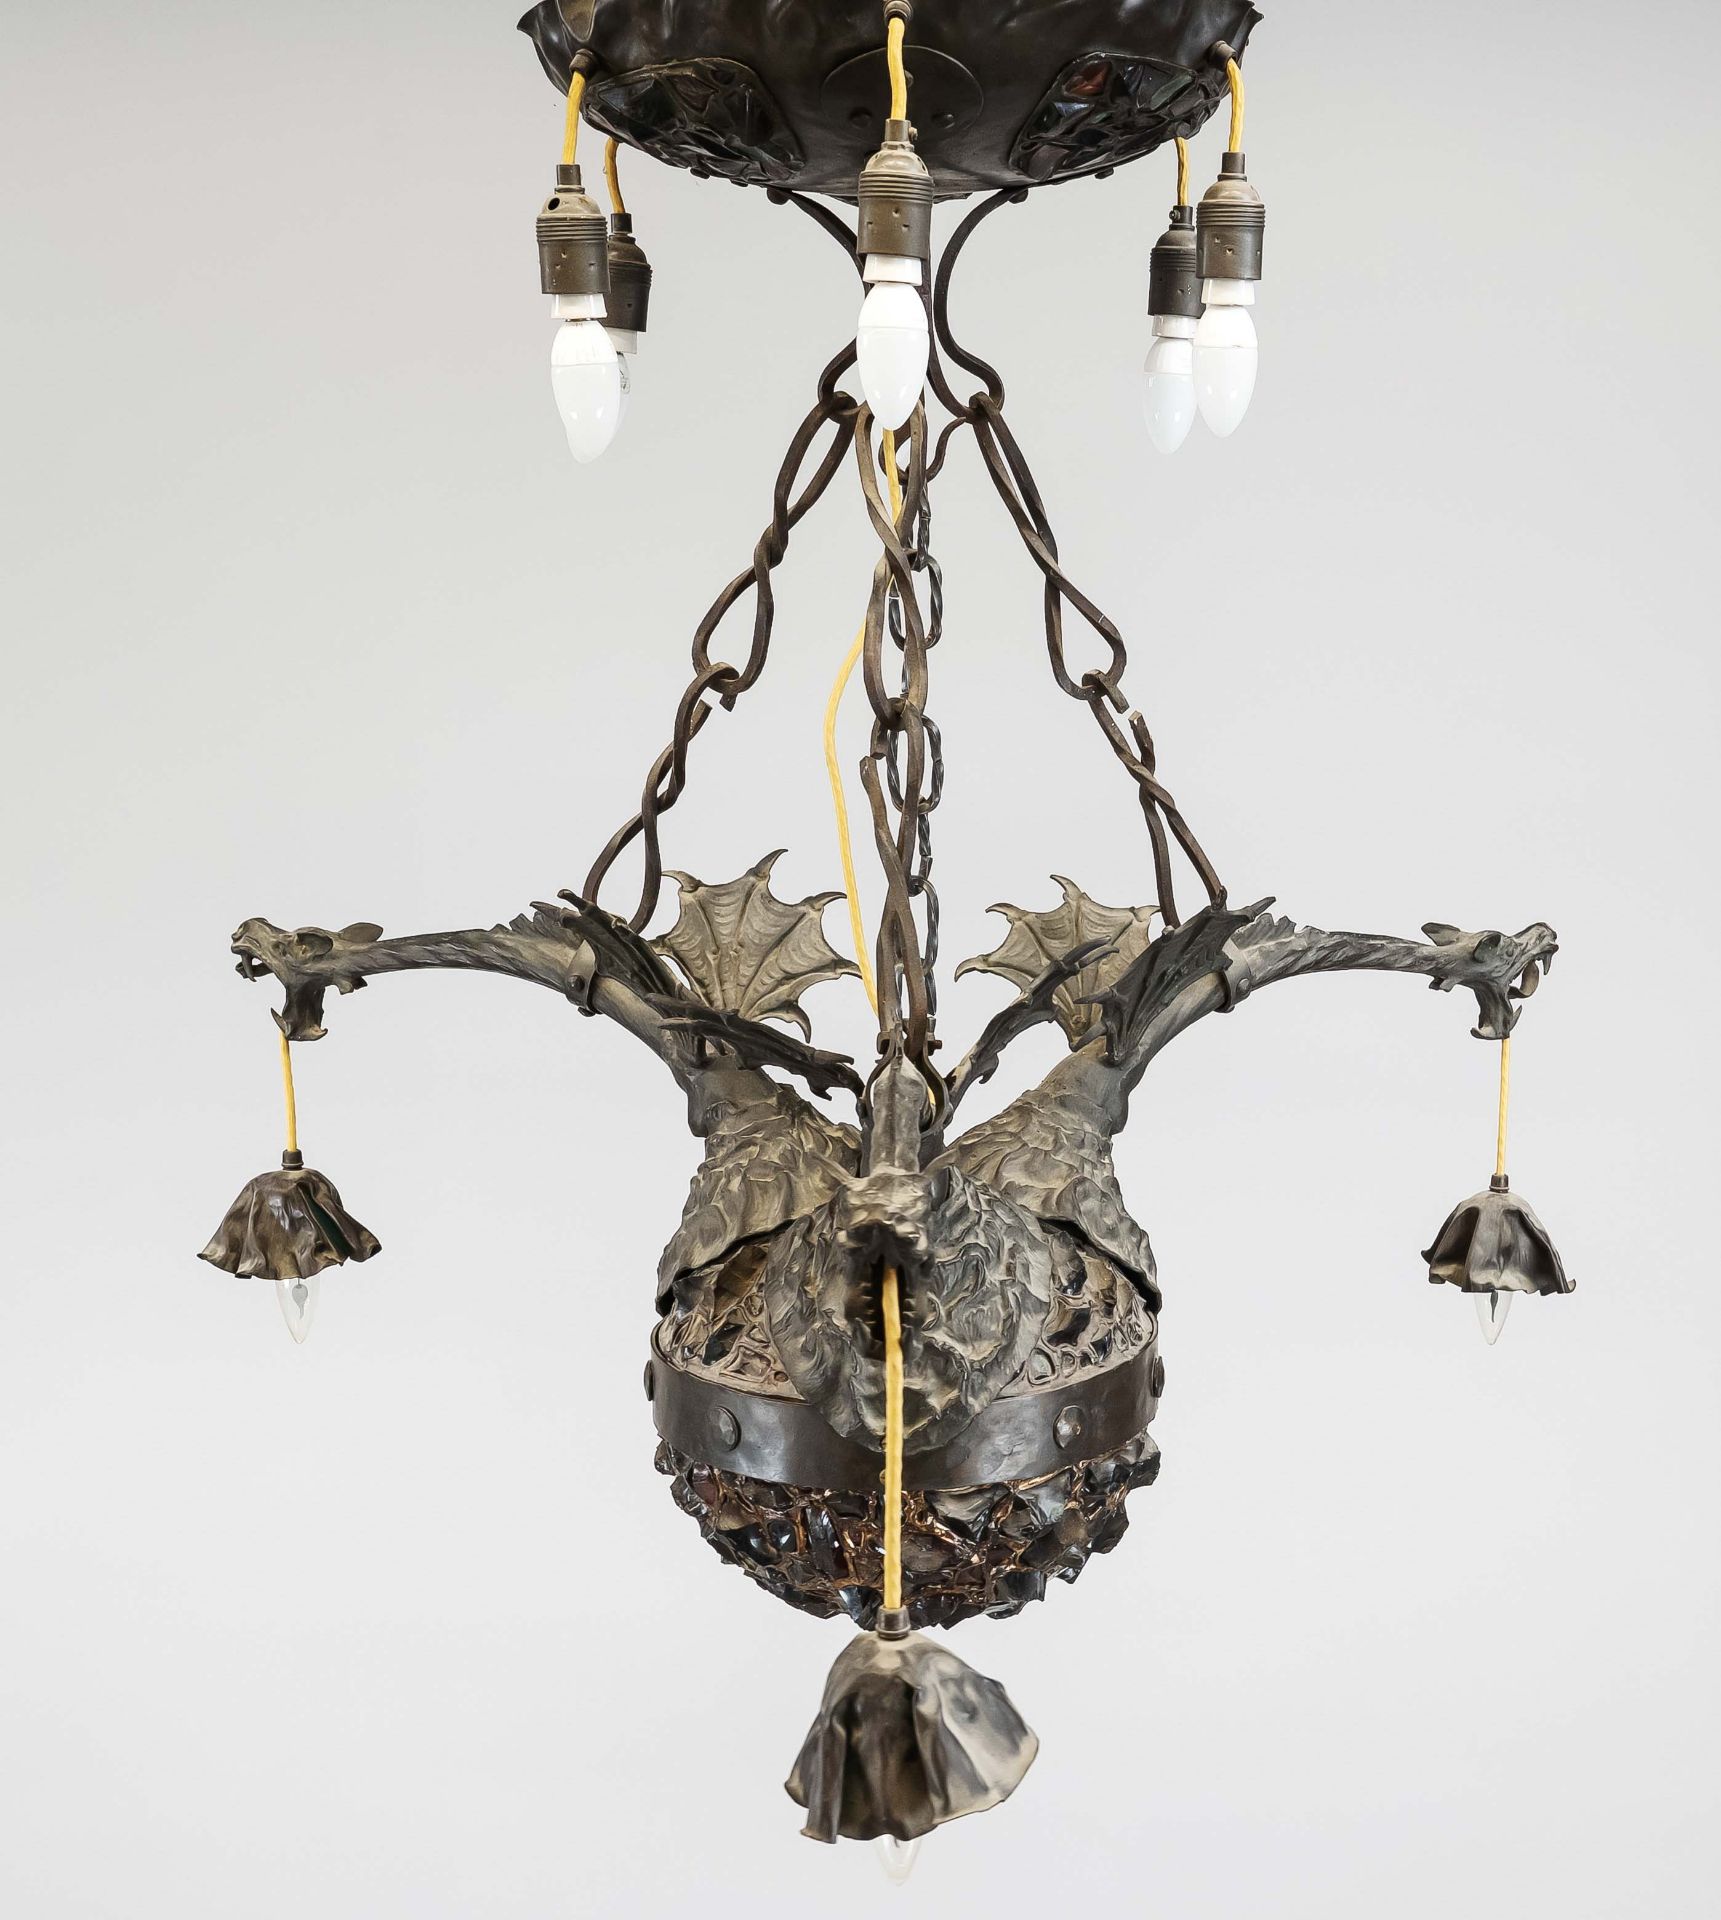 Large dragon lamp with humped glass, c. 1900. Large humped glass globe with wide band with rivets. - Image 2 of 2